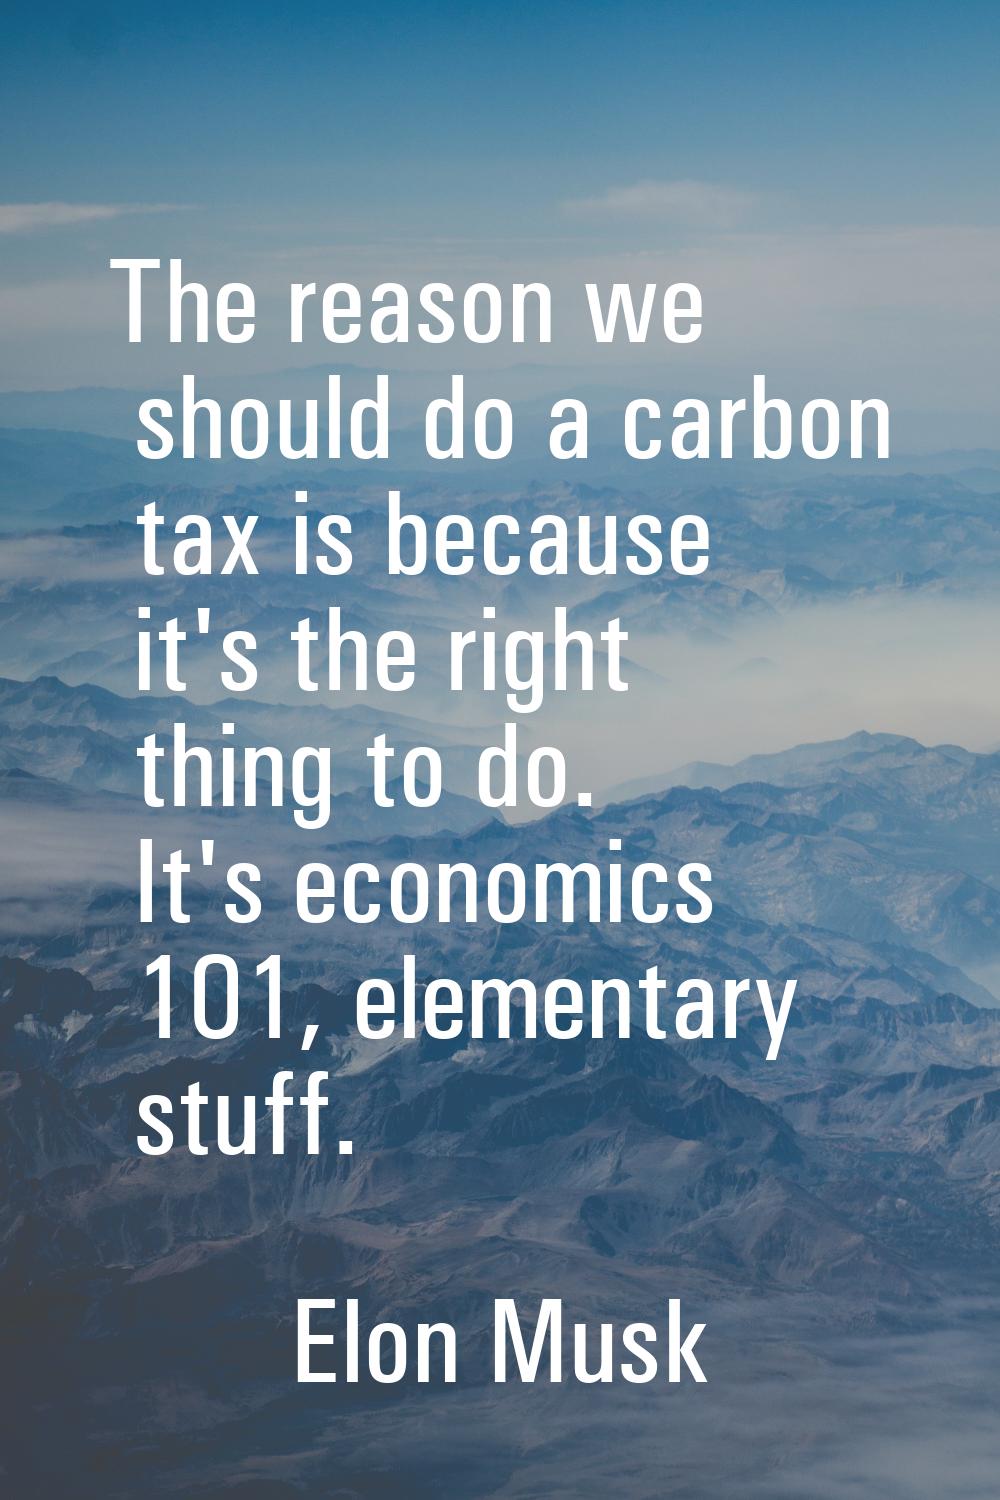 The reason we should do a carbon tax is because it's the right thing to do. It's economics 101, ele